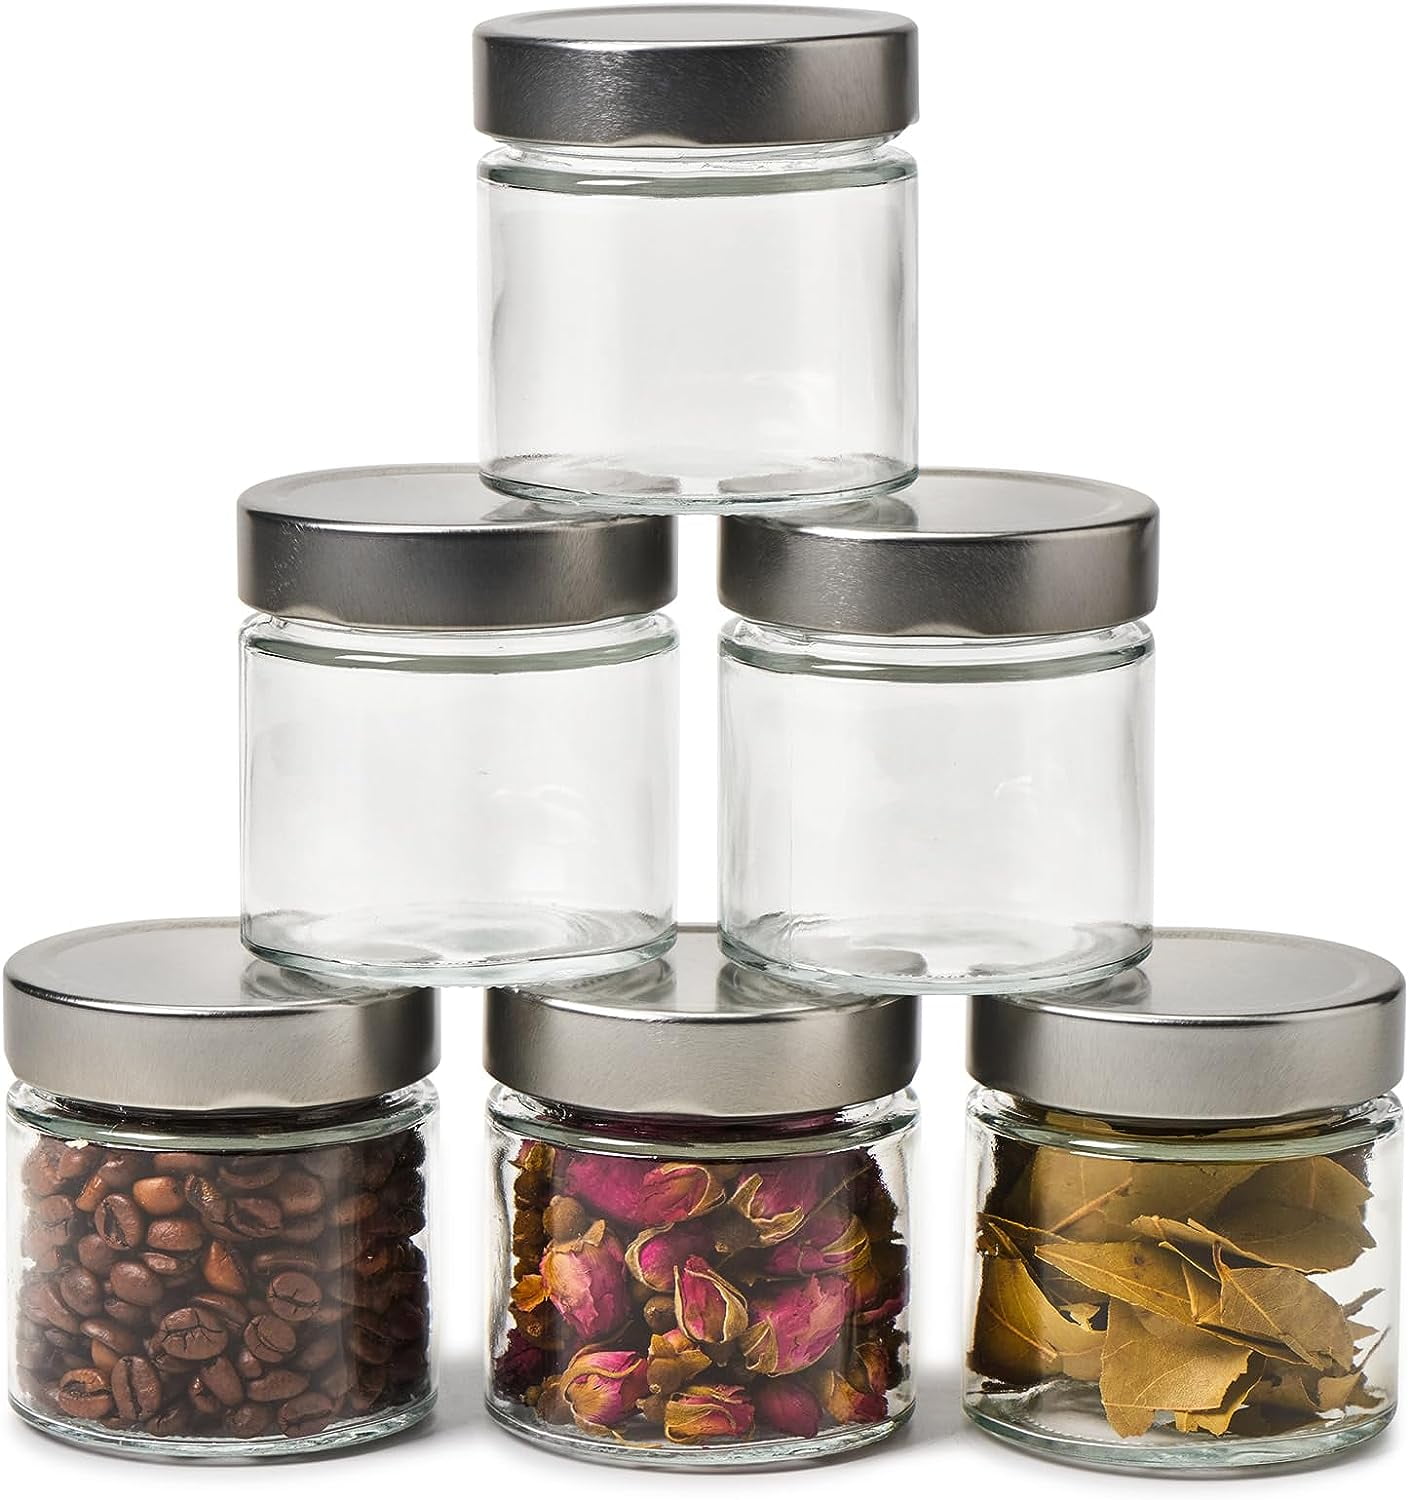 EZOWare 6oz Airtight Glass Jars with Brushed Silver Lids, Set of 6